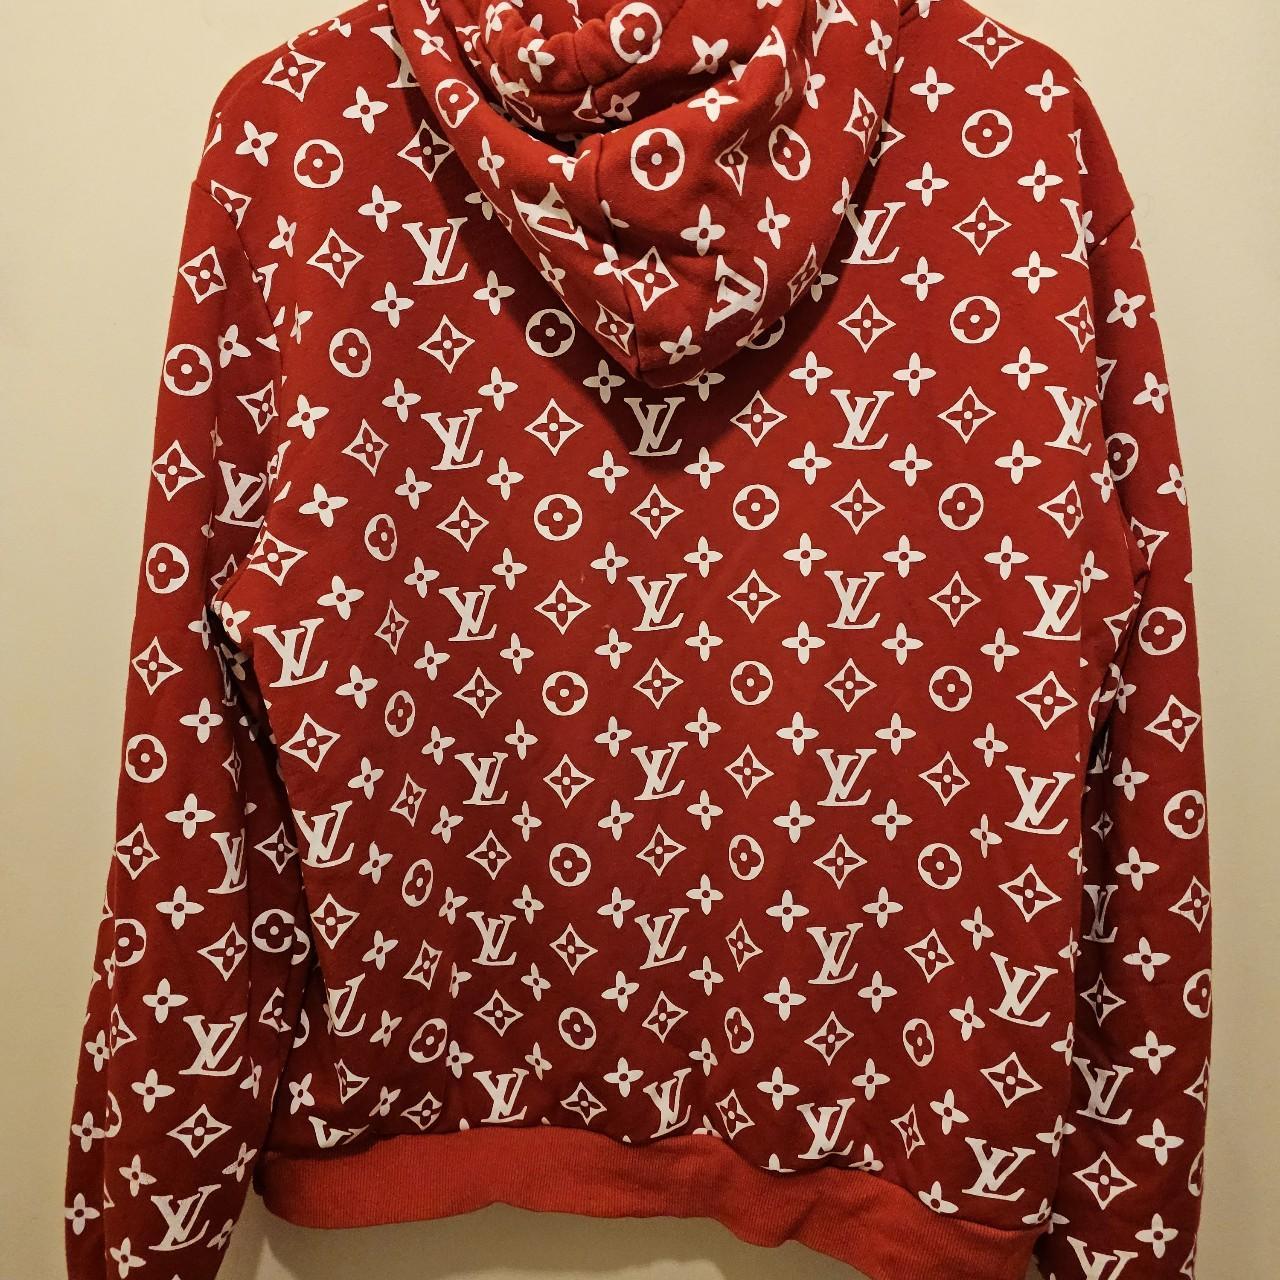 2020 Red Supreme x Louis Vuitton Hoodie This is NOT... - Depop